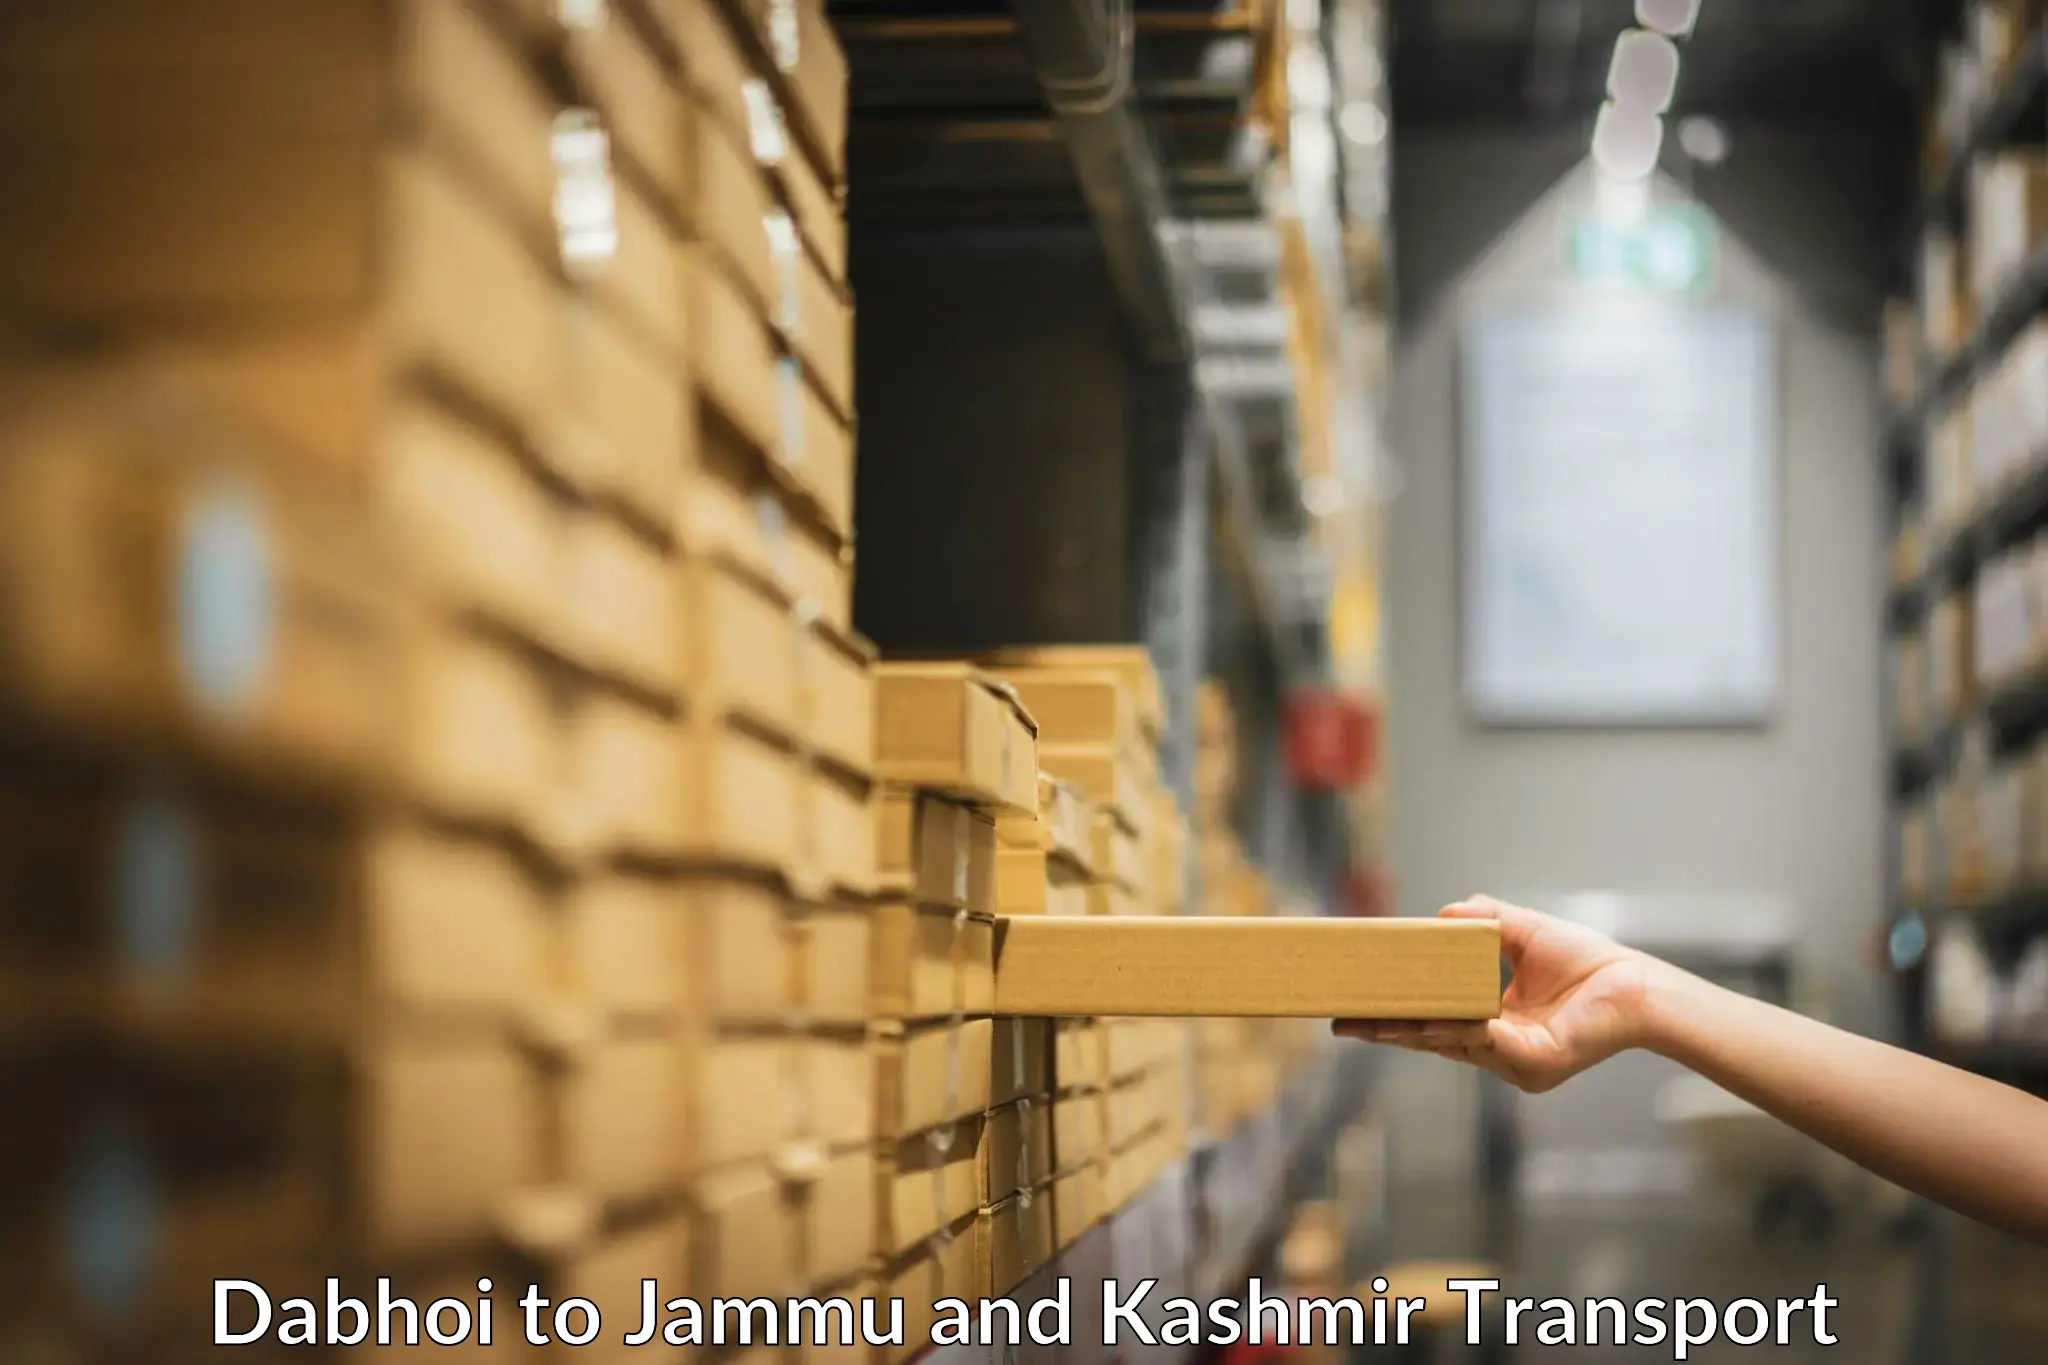 Truck transport companies in India Dabhoi to Jammu and Kashmir